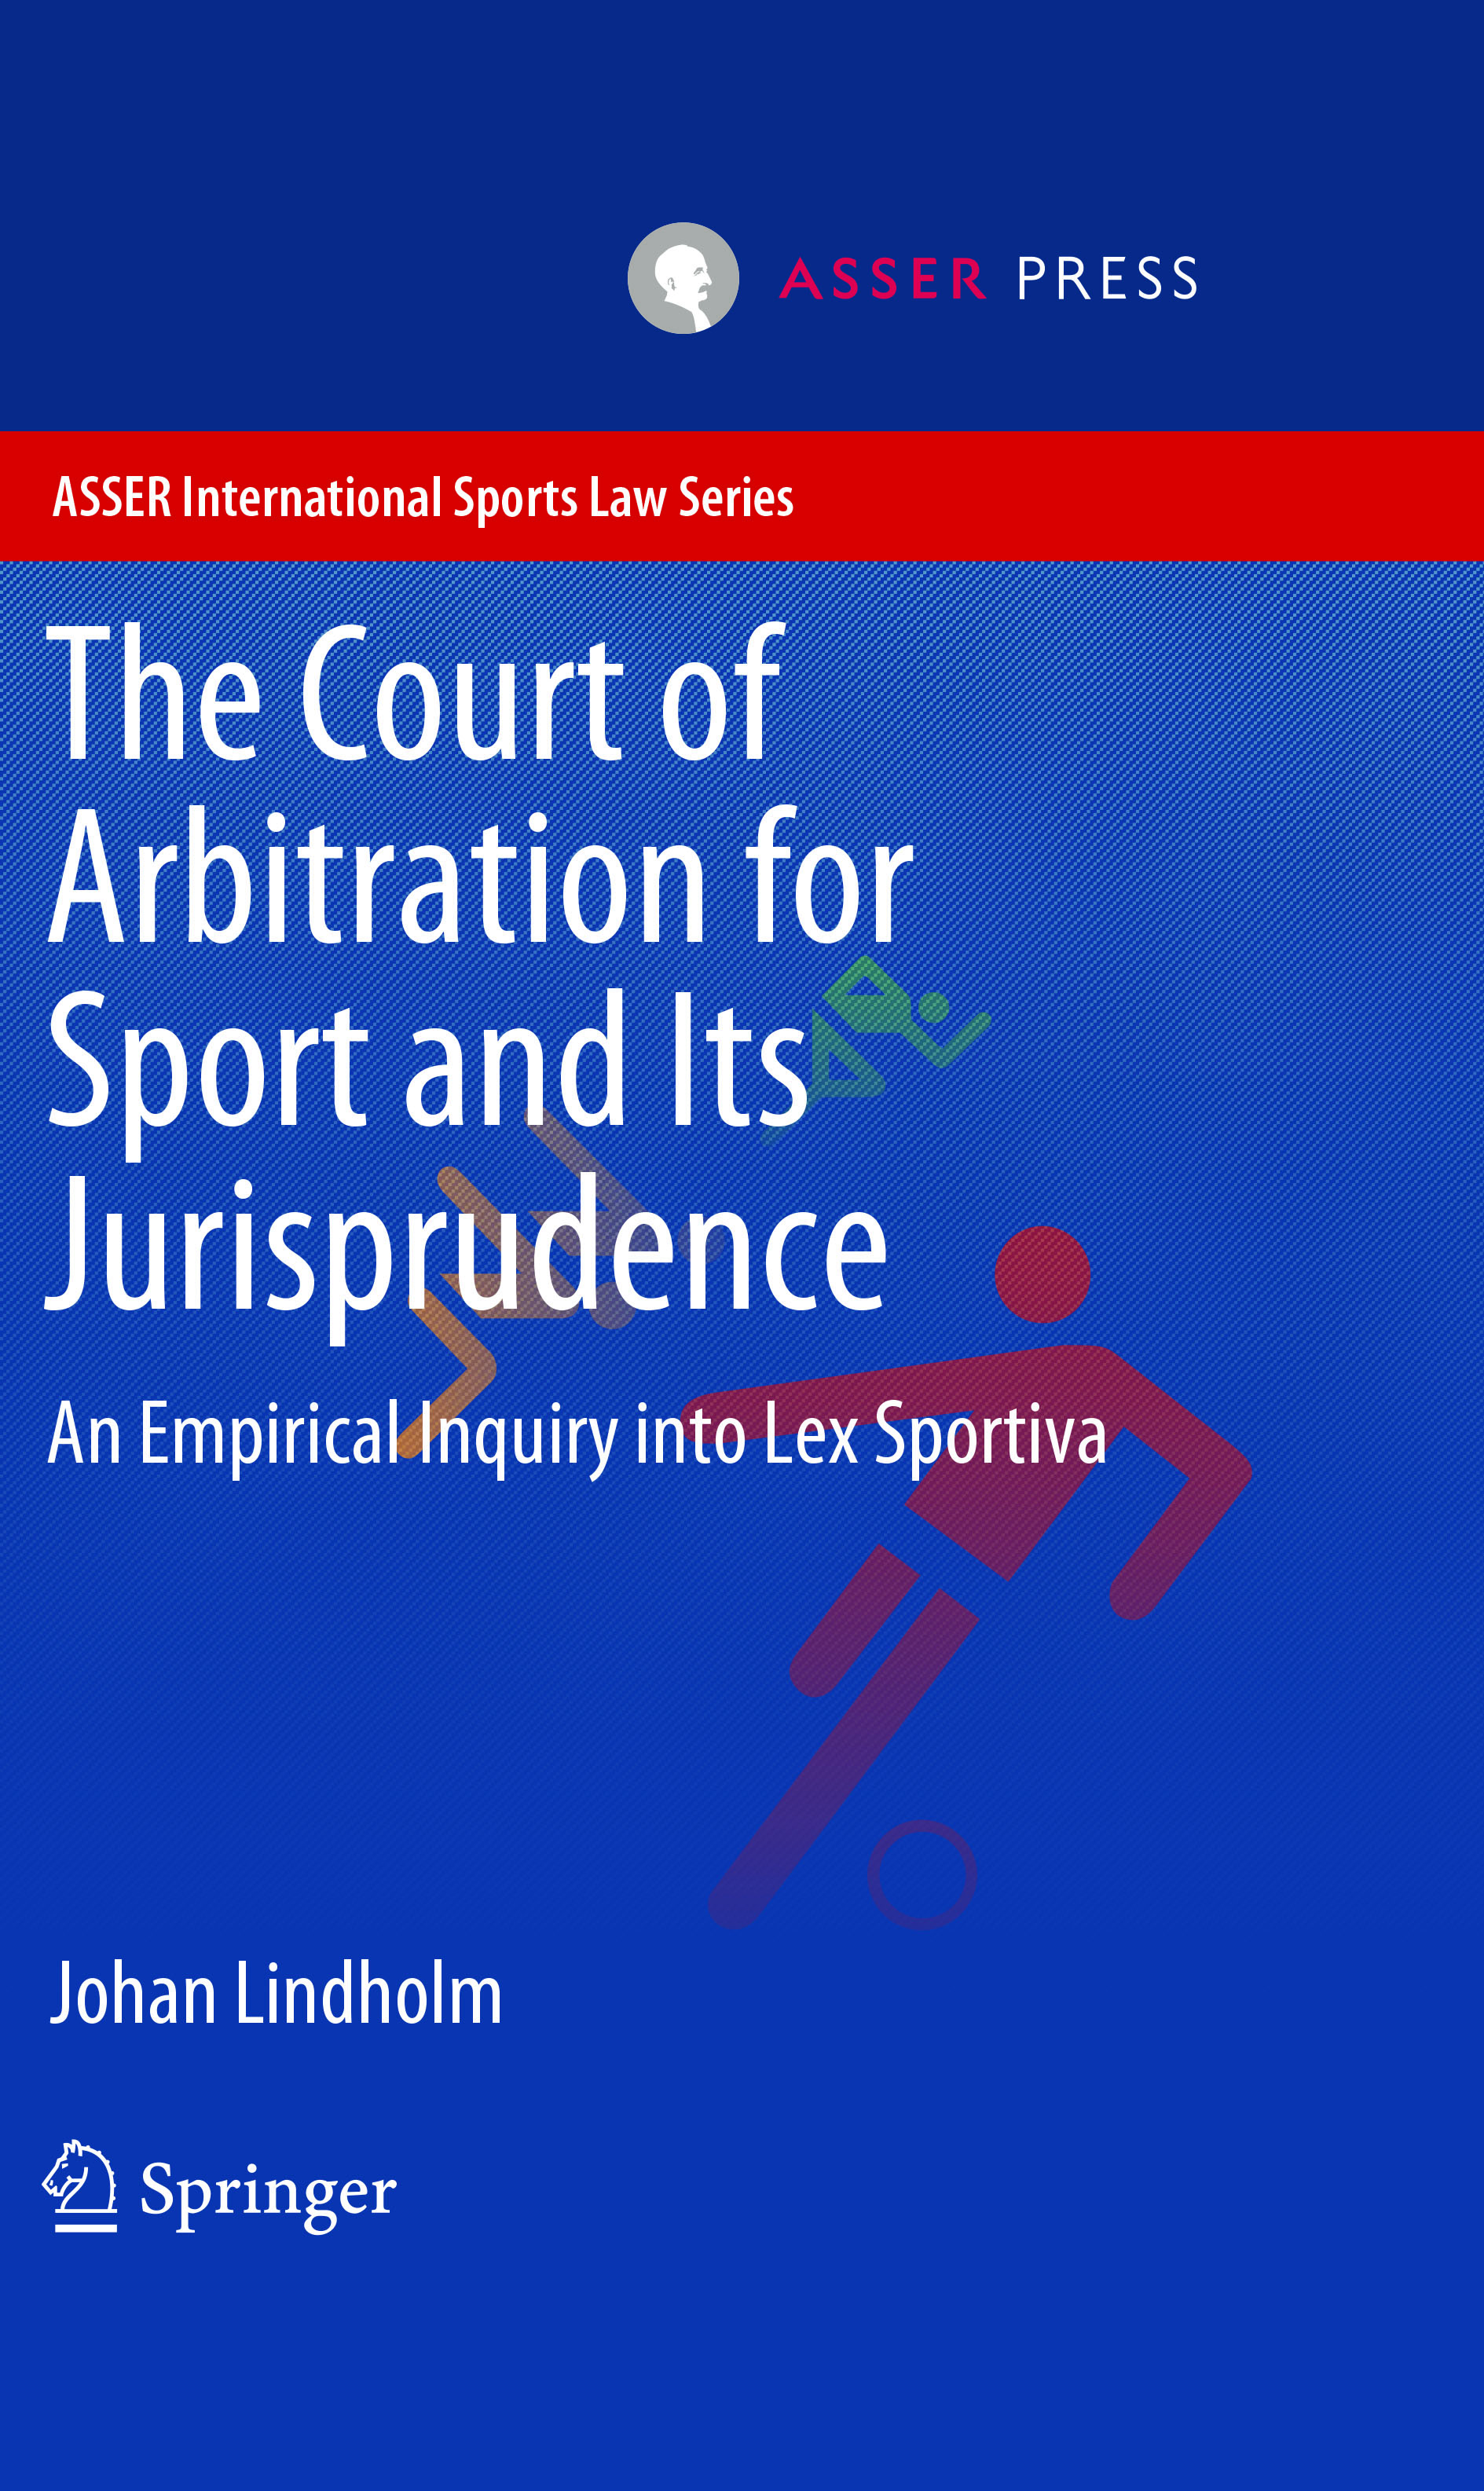 The Court of Arbitration for Sport and Its Jurisprudence - An Empirical Inquiry into Lex Sportiva